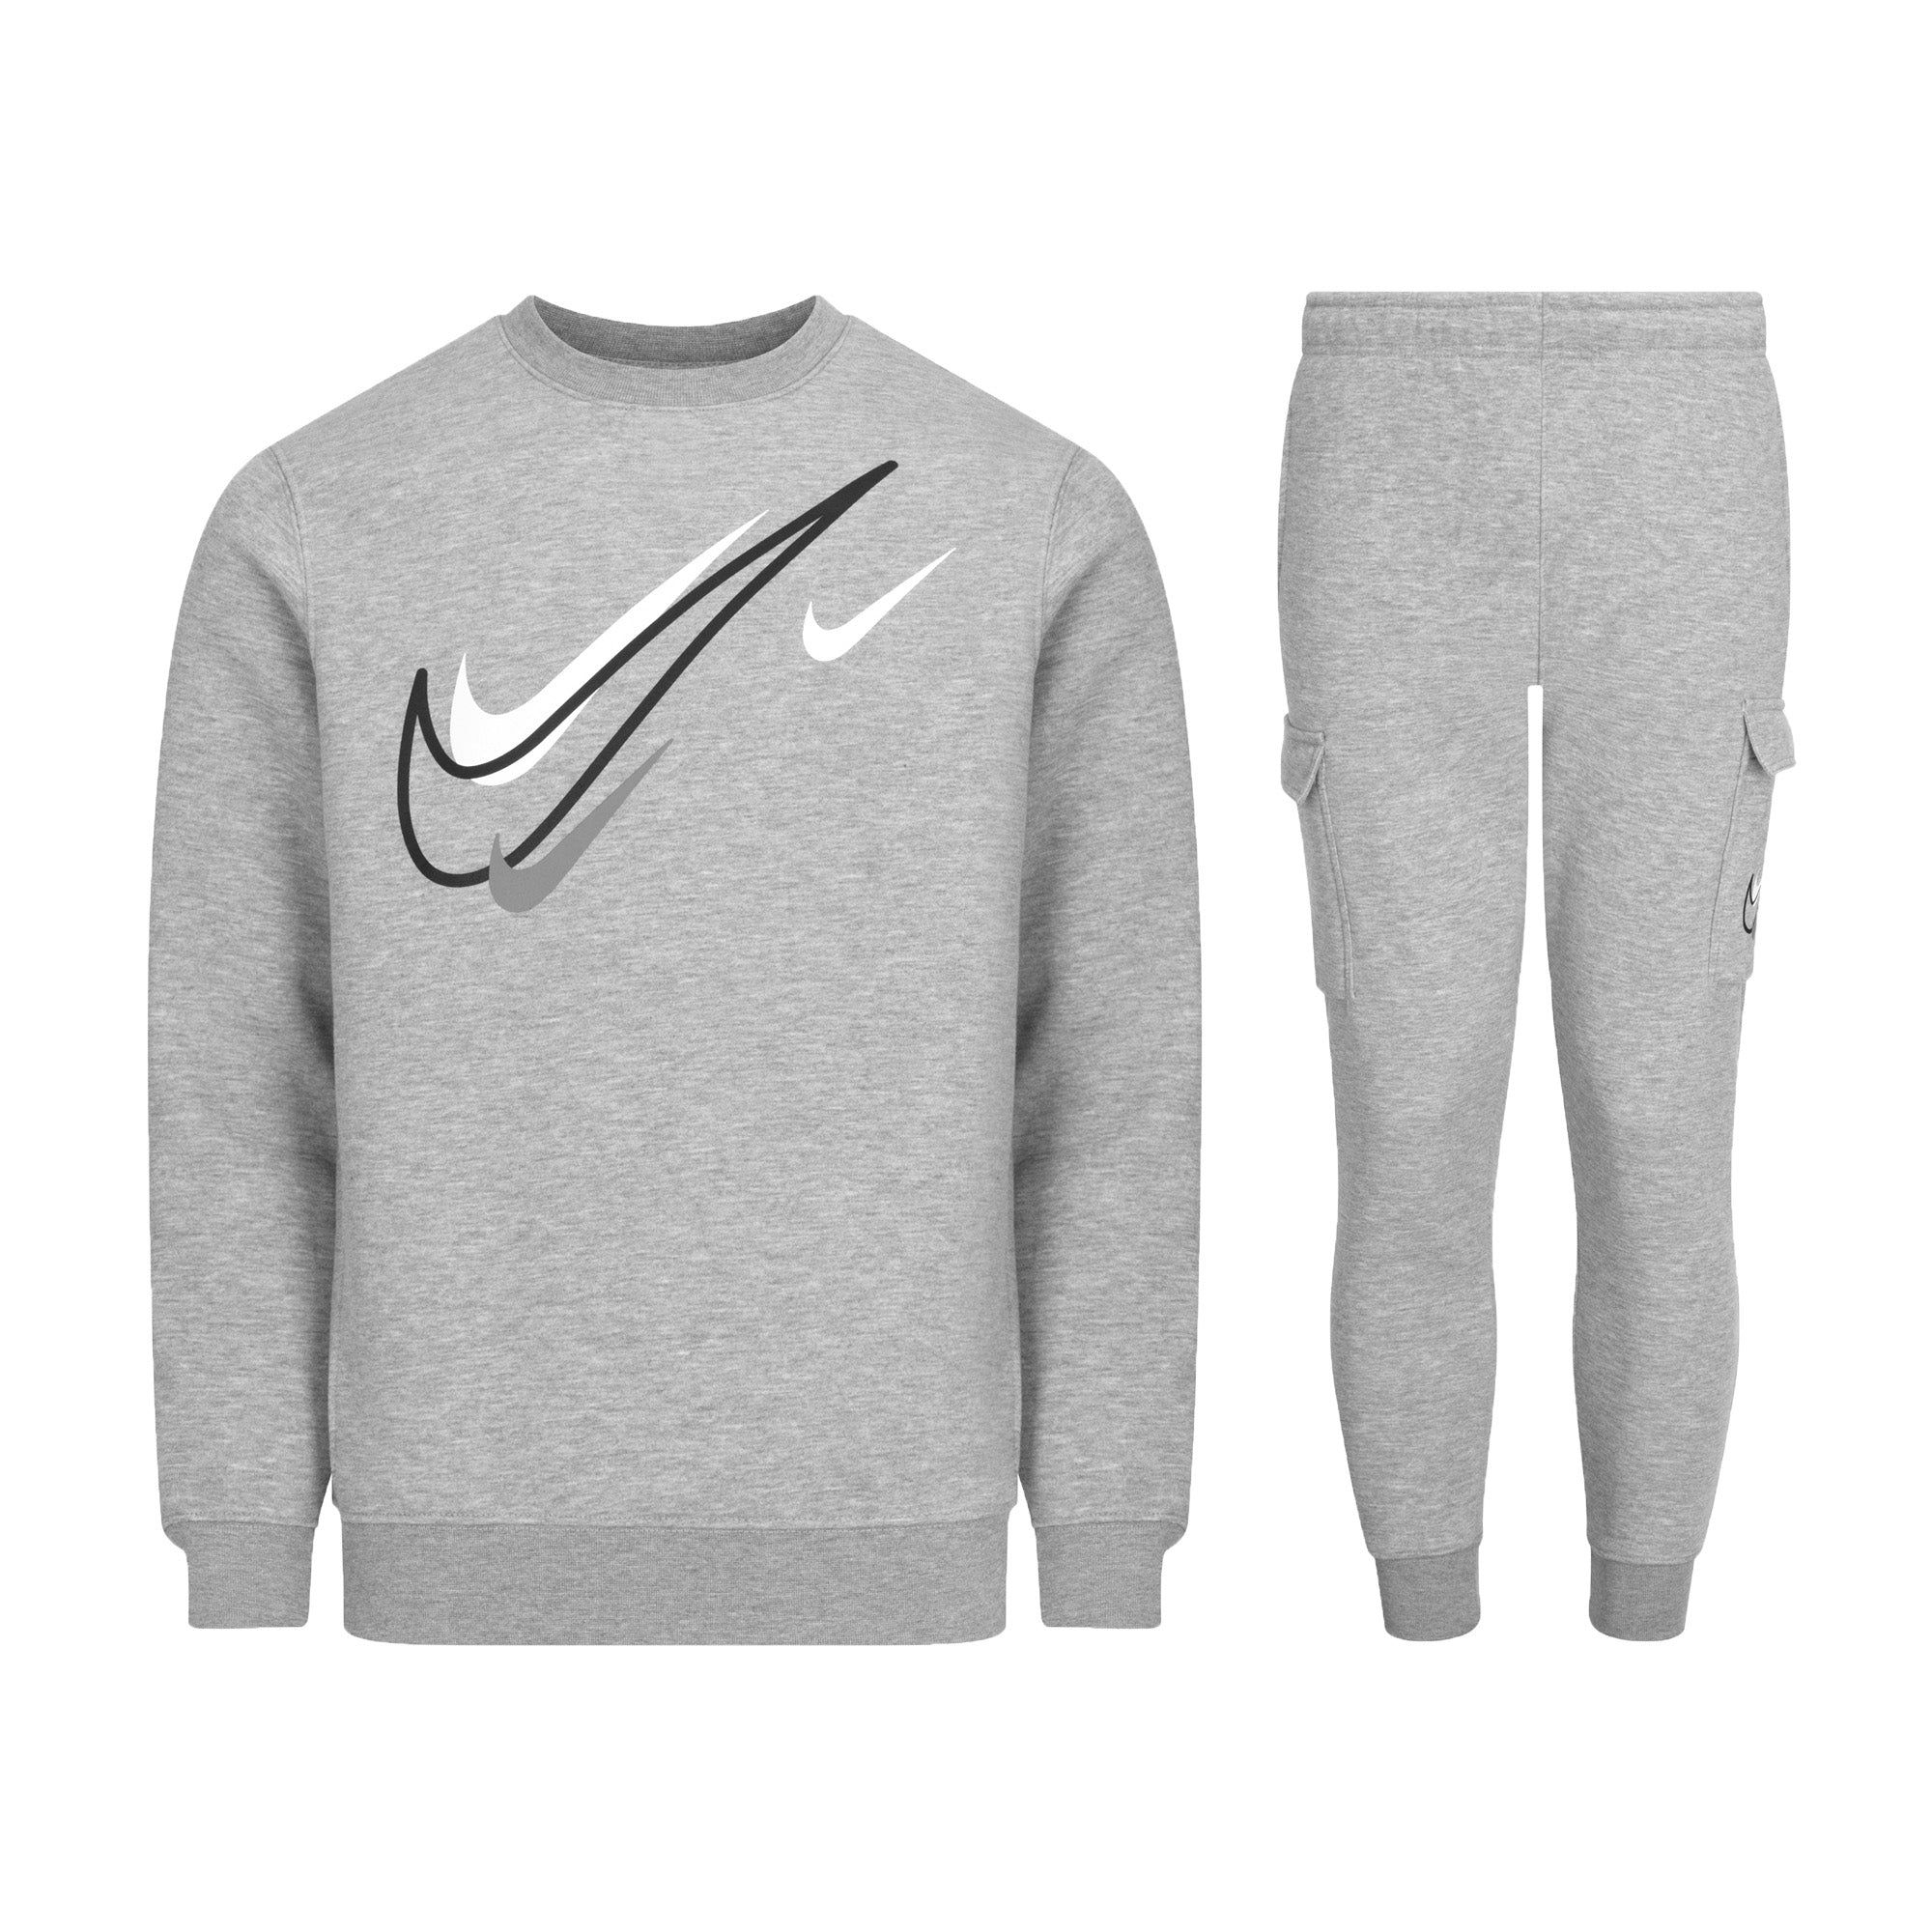 Crew Neck Top, Sportswear Multi Swoosh Graphic.
Ribbed Neckline, hem and Cuffs.
Elasticated Waist
Concealed draw cord Cuffed Joggers.
2 Side Pockets, 2 Cargo Flat Pockets Secured with Pressed Buttons.
Soft and Comfortable Feel Fabric.